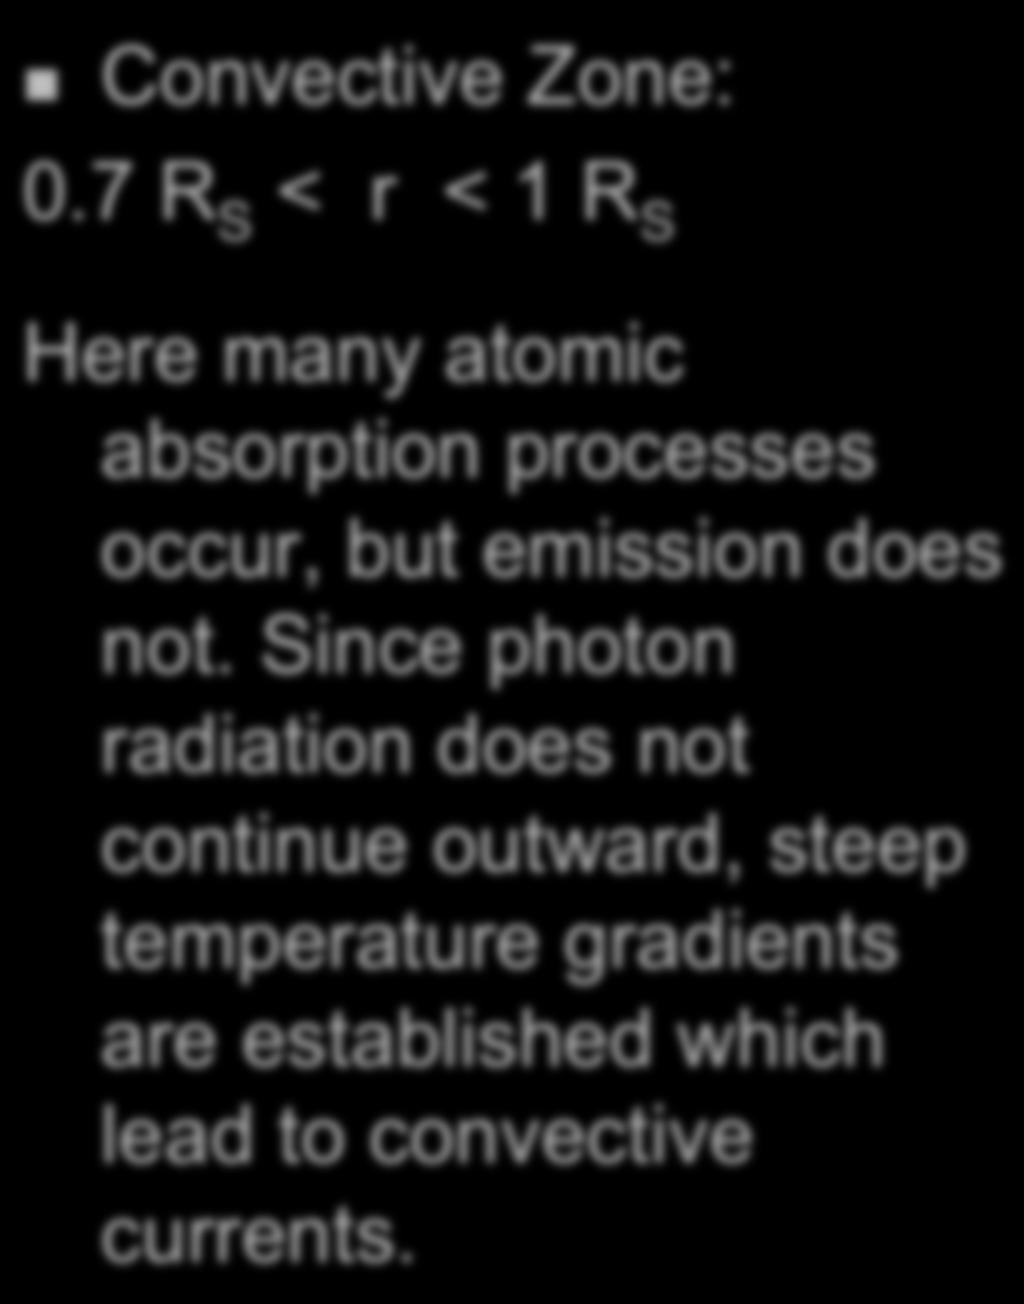 Solar Structure " Convective Zone: 0.7 R S < r < 1 R S Here many atomic absorption processes occur, but emission does not.